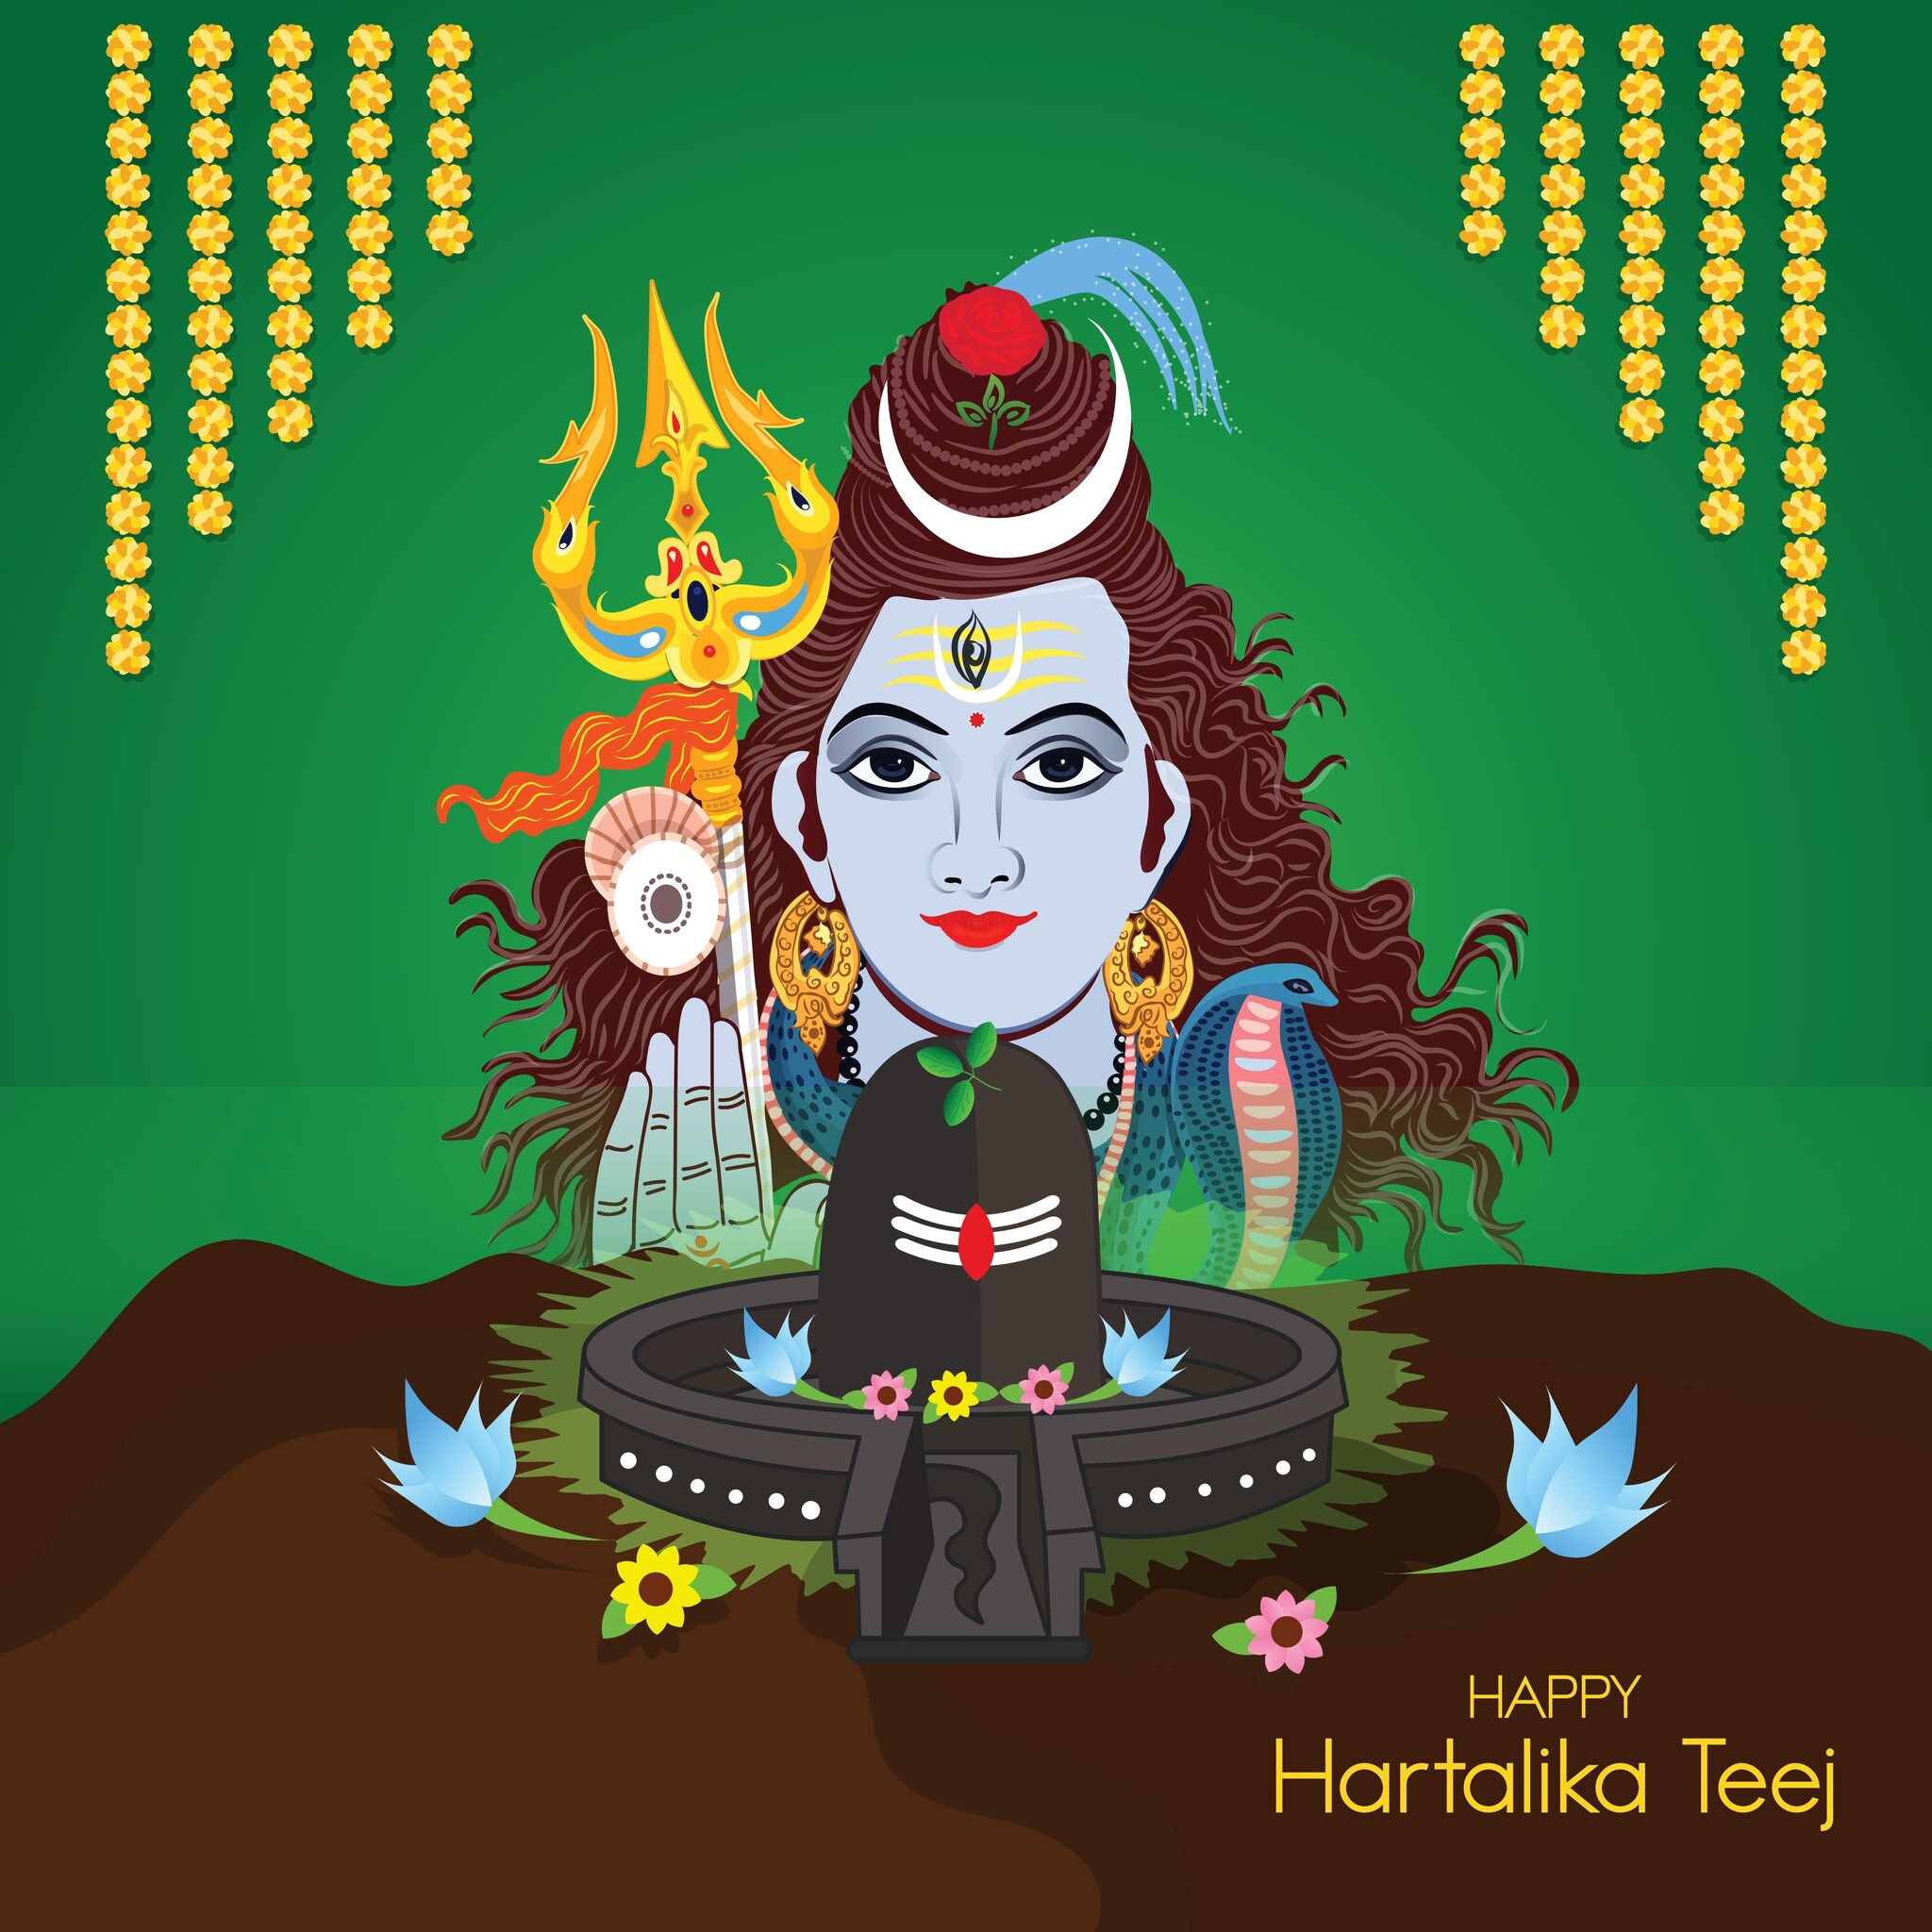 Happy Hartalika Teej 2022 Wishes Messages Images Quotes And Whatsapp Greetings To Share 7966